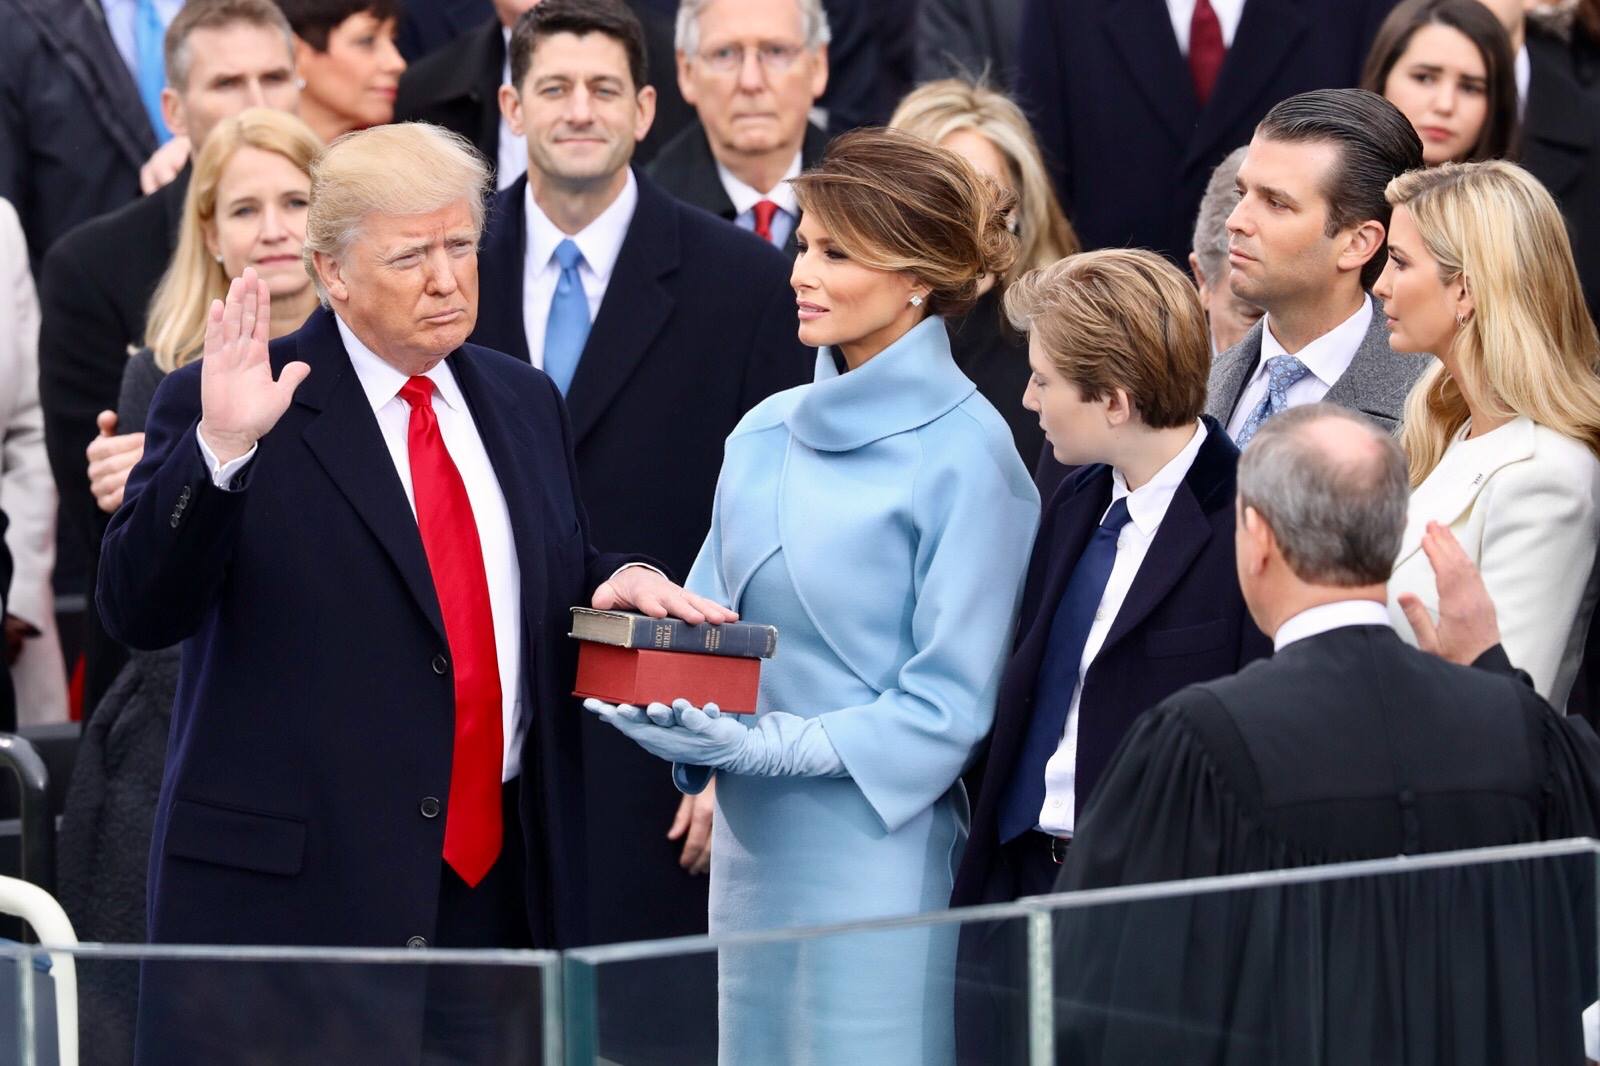 President Donald Trump being sworn in on January 20, 2017 at the U.S. Capitol building in Washington, D.C. Melania Trump wears a sky-blue cashmere Ralph Lauren ensemble. He holds his left hand on two versions of the Bible, one childhood Bible given to him by his mother, along with Abraham Lincoln’s Bible. 